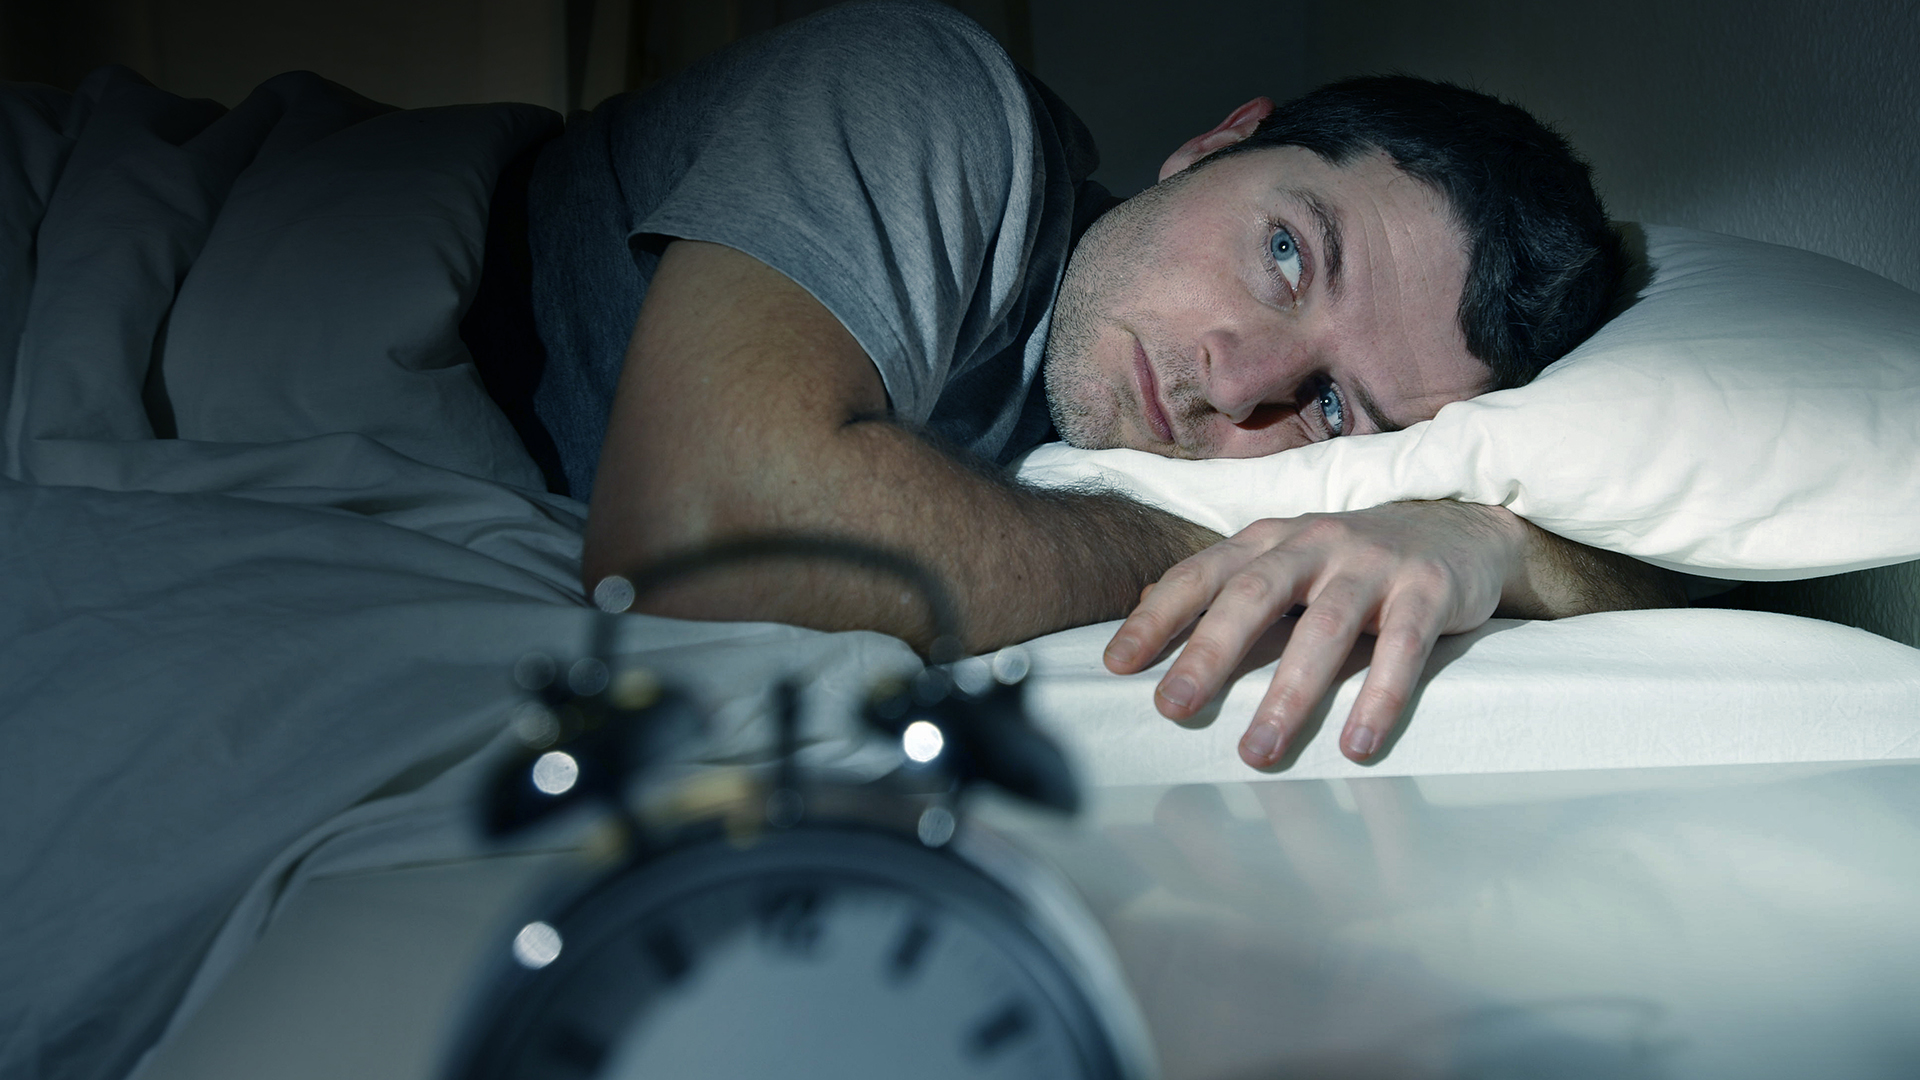 Lack of sleep leads to increased appetite and cravings for sweets